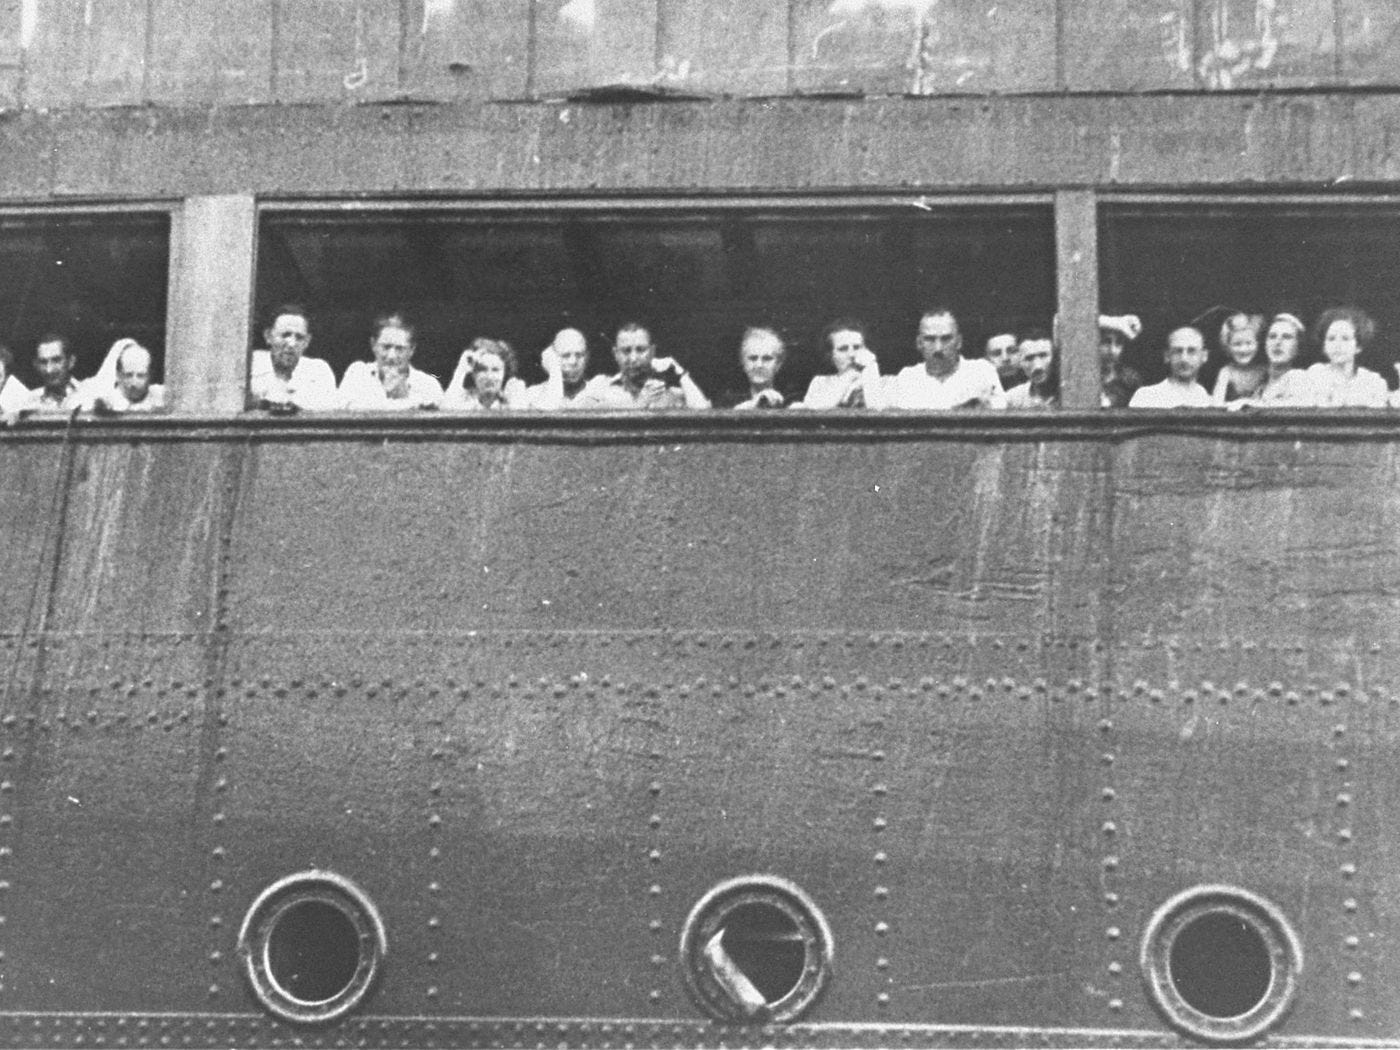 In 1939 the US turned away a Jewish refugee ship. This Twitter account  commemorates the victims. - Vox